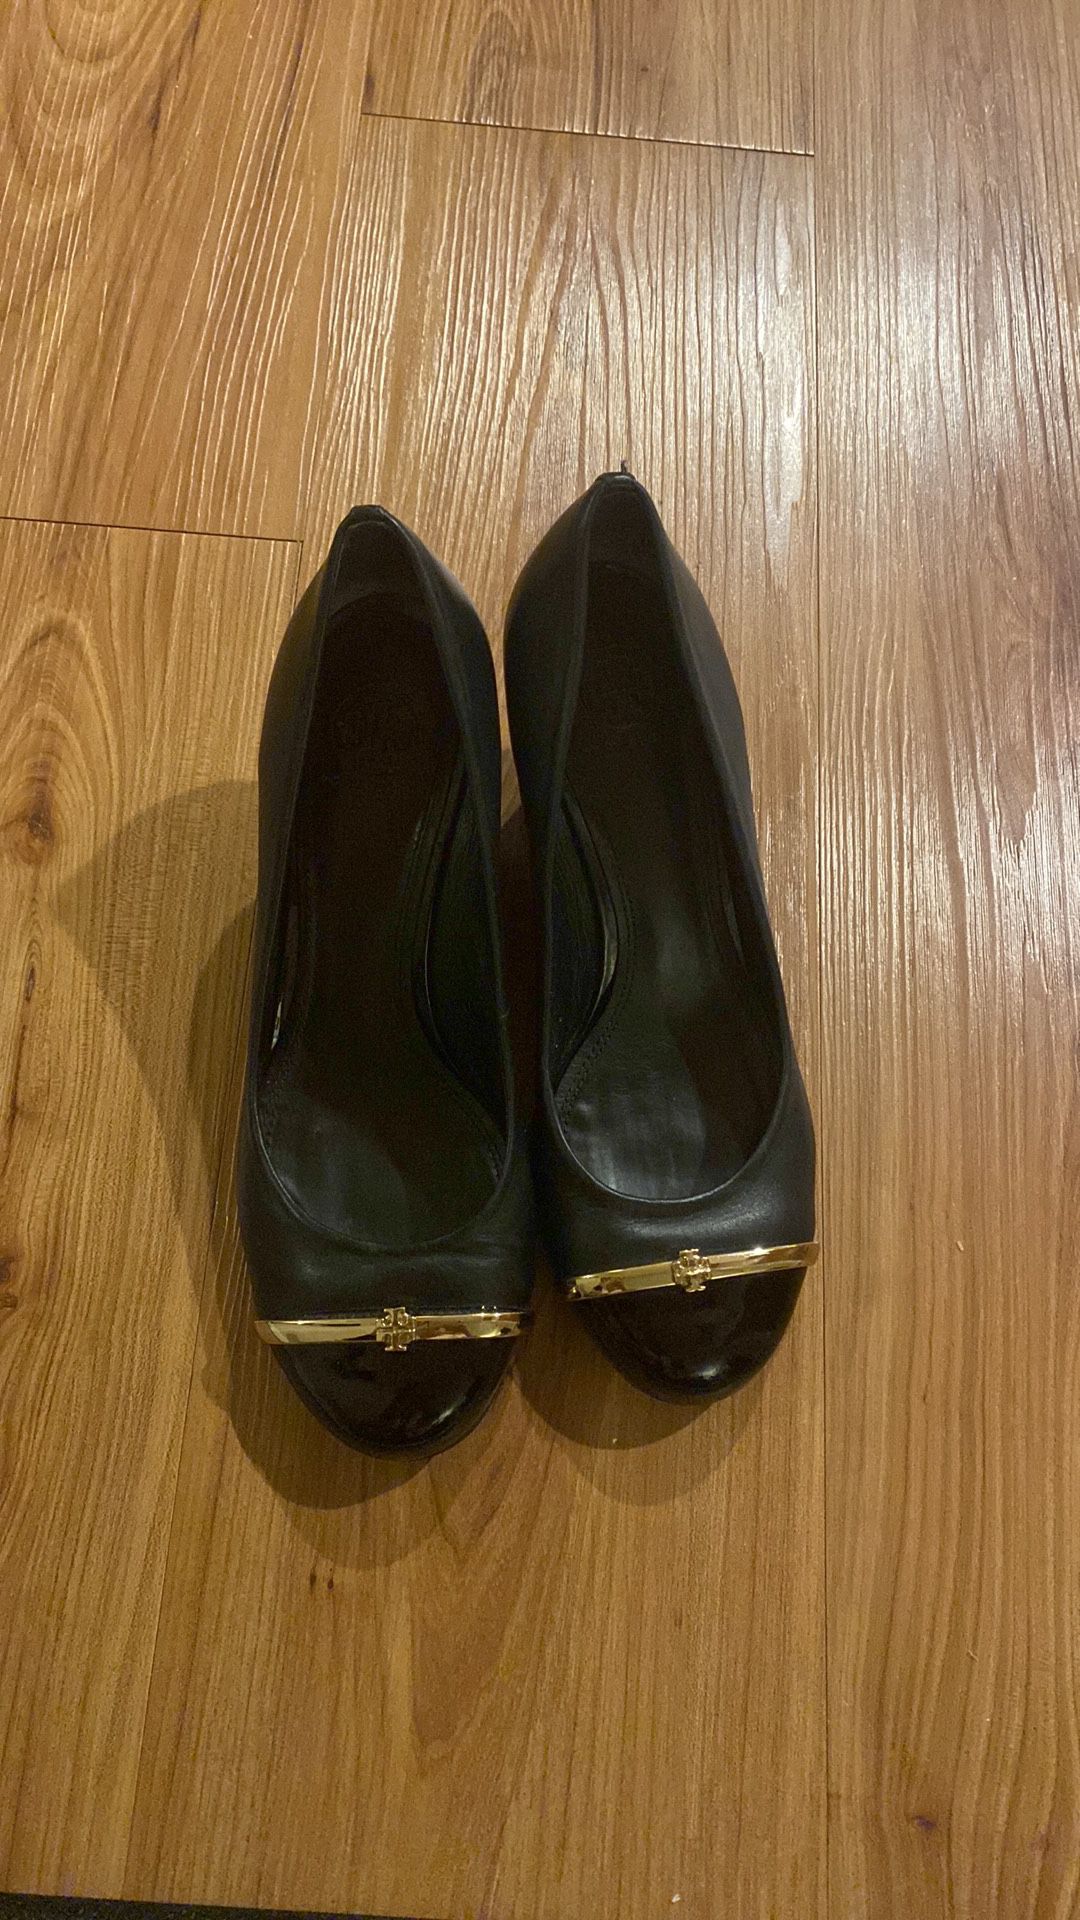 Tory Burch Black Shoes for Sale in Mckees Rocks, PA - OfferUp